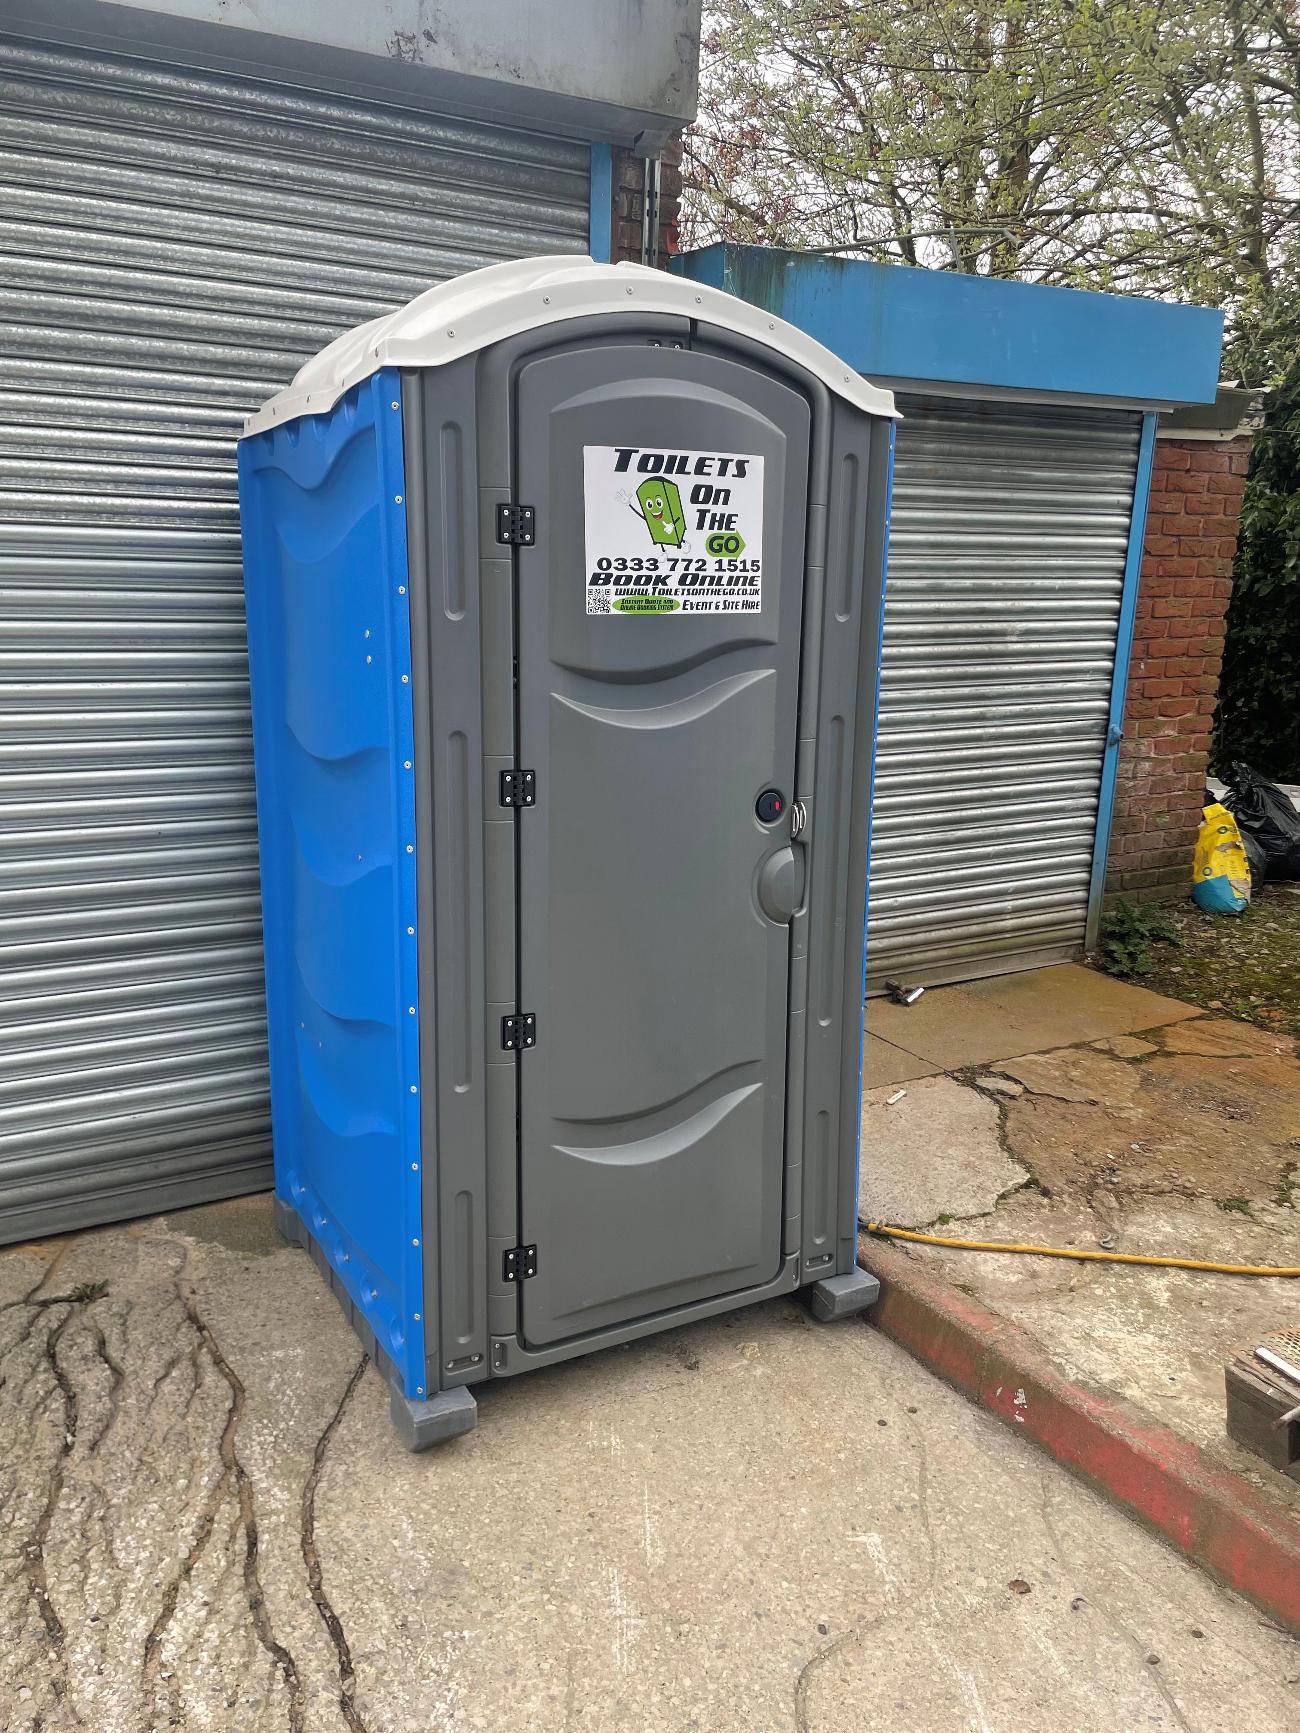 Gallery | Portable Toilet Loo Hire Rental Company in North West uk and Manchester gallery image 33